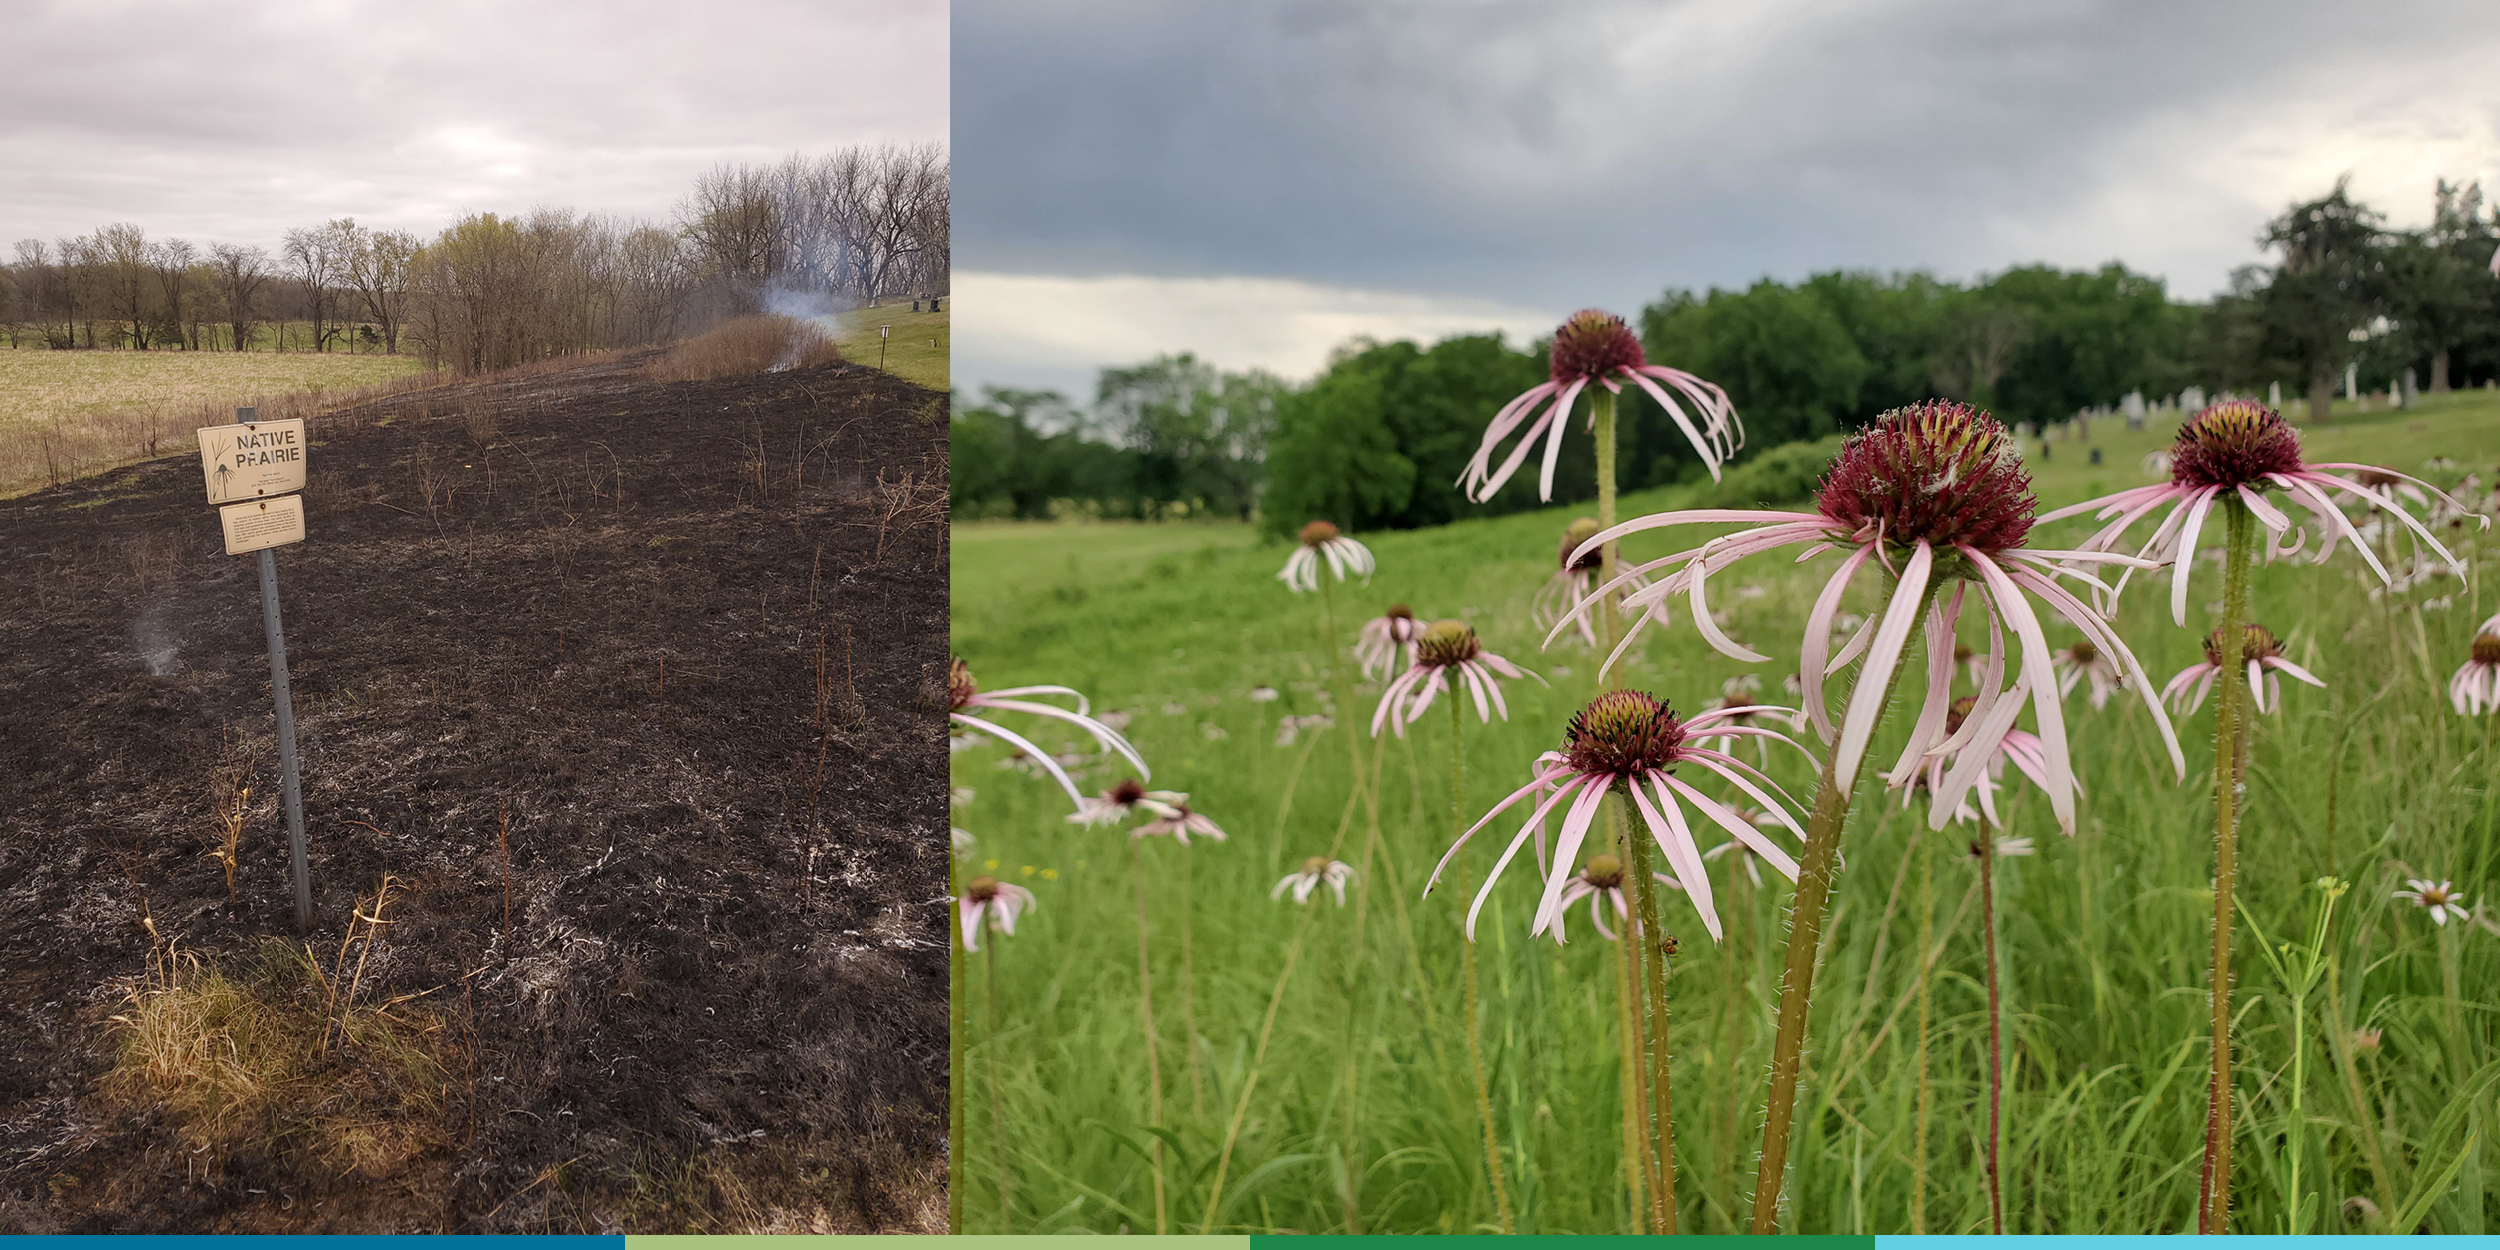 A composite inage made from two photos. The left hand photo shows a recently burned area of grassland that was set on fire to control weeds. Tiny plumes of gray smoke rise from the blackened ashes. The right hand photo shows the same area of grassland several months later. The grass has regrown and wildflowers are in bloom. The most abundant flowers have long stems, with narrow pink petals drooping down from a purple flower head.